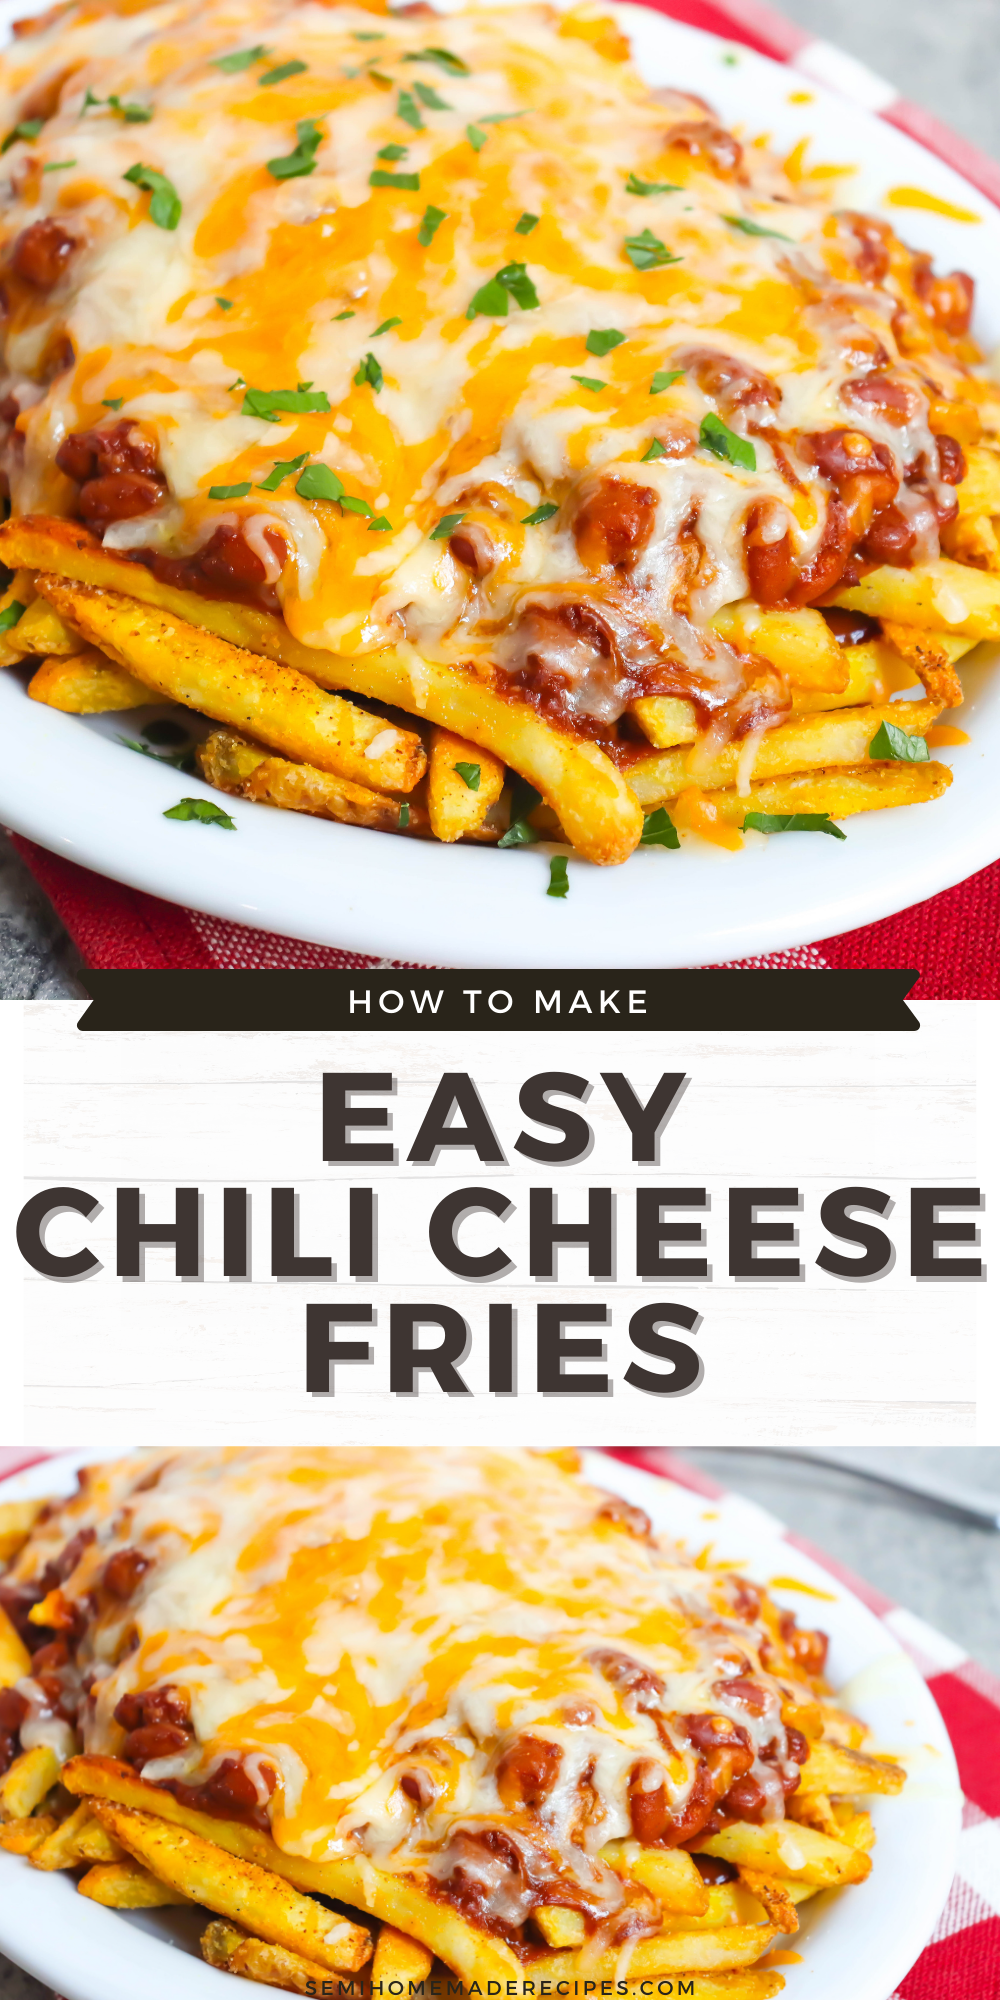 Easy Chili Cheese Fries – This dish is made with baked frozen French fries seasoned with seasoning salt and topped with chili sauce and chili beans Then it is topped with shredded cheese before being placed under the broiler to melt the cheese! Garnish with parsley and enjoy! Great with homemade ranch dressing!